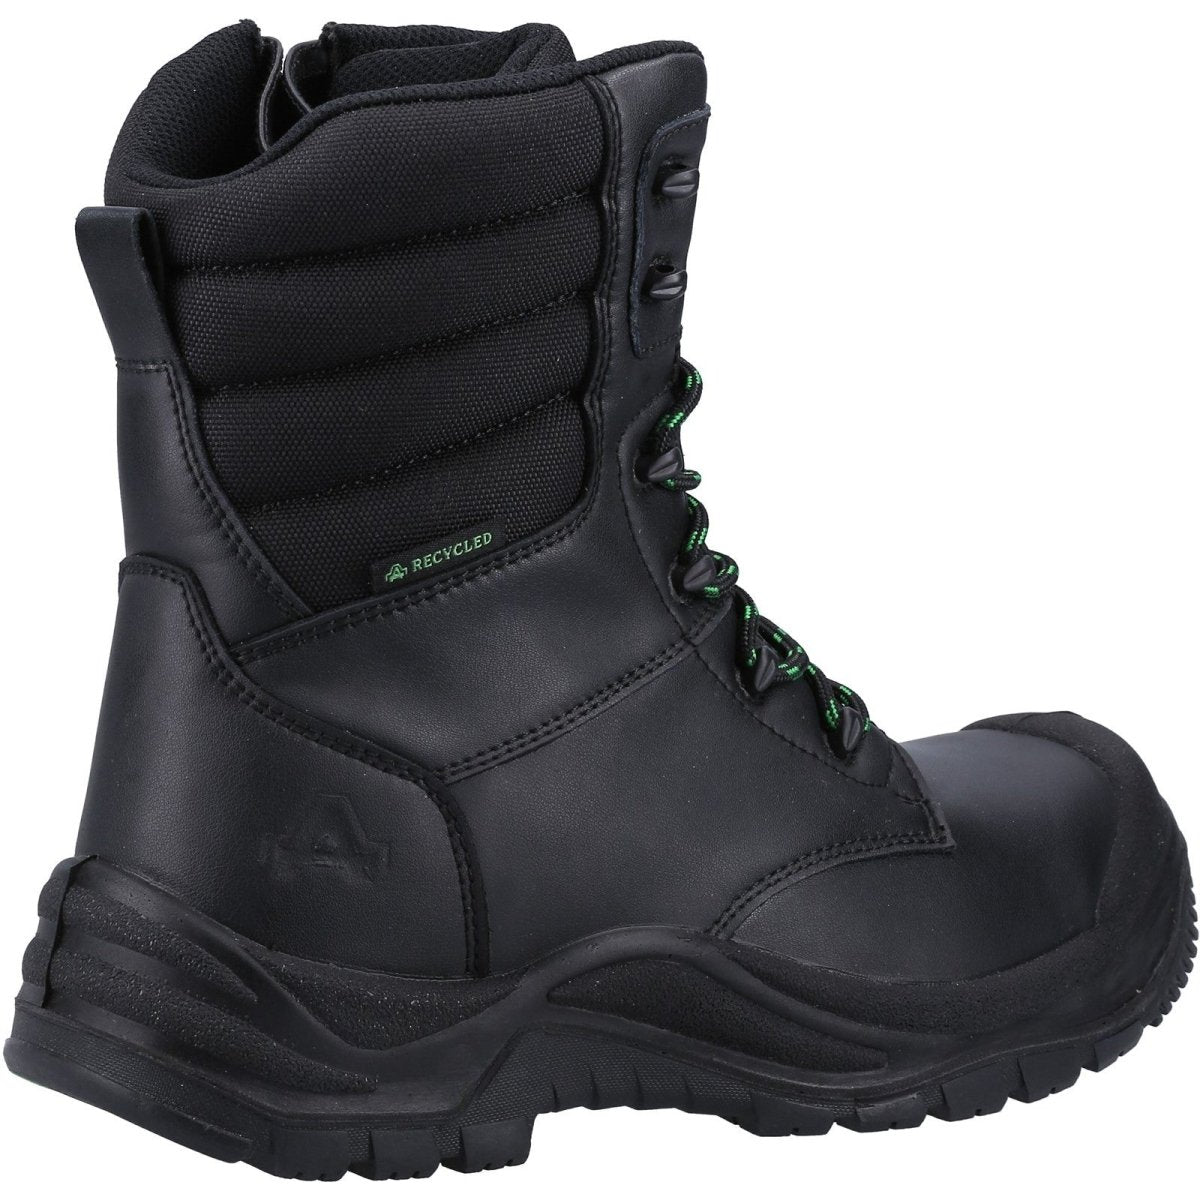 Amblers Safety 503 Safety Boots - Shoe Store Direct